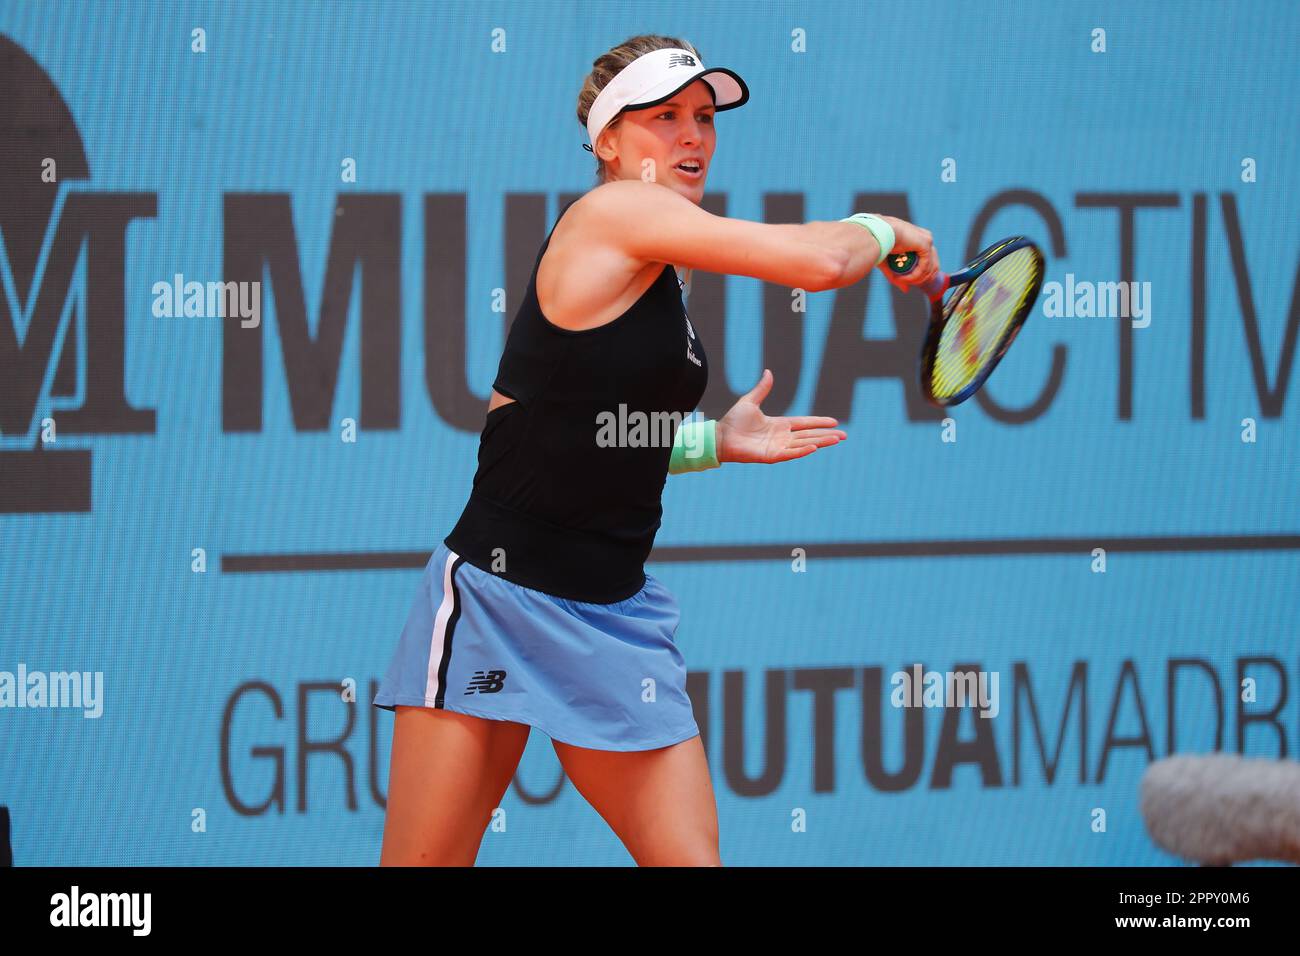 Madrid, Spain. 24th Apr, 2023. Eugenie Bouchard (CAN) Tennis : Eugenie  Bouchard during singles qualifying 1st round match against Sara Sorribes  Tormo on the WTA 1000 tournaments Mutua Madrid Open tennis tournament